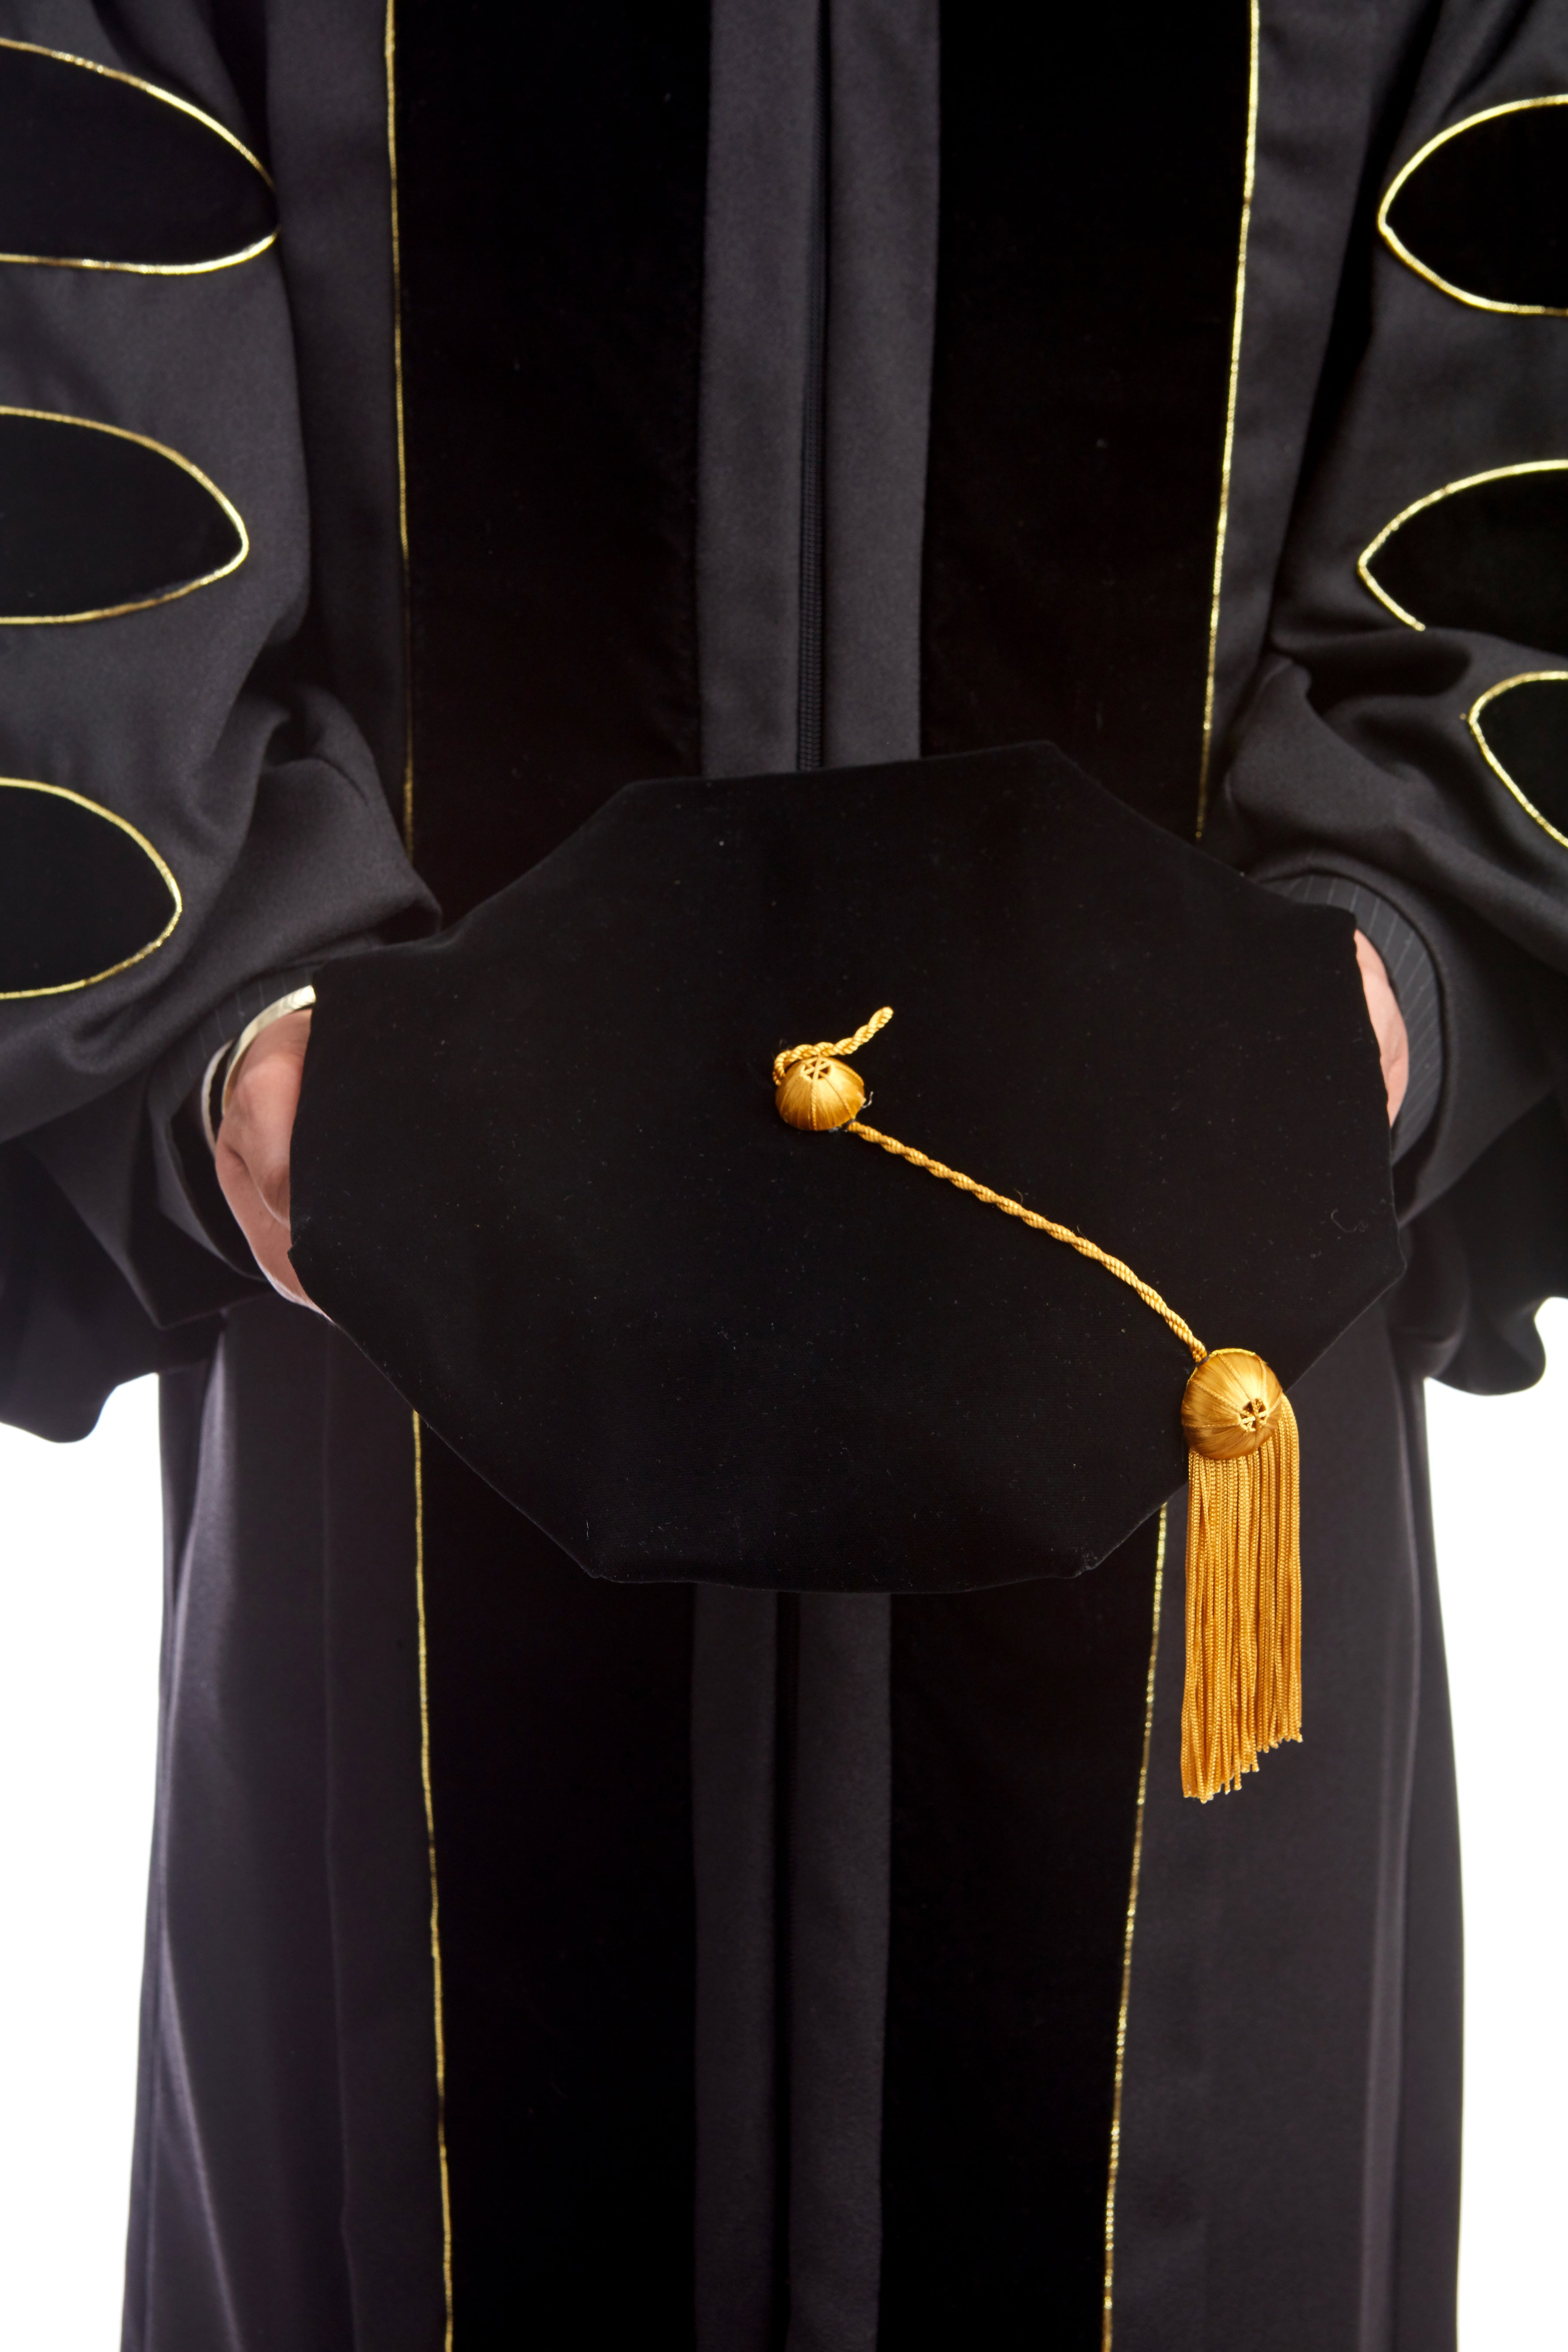 University of Missouri Doctoral Regalia Rental Set - Doctoral Gown, PhD Hood, and 8-sided Cap / Tam with Tassel